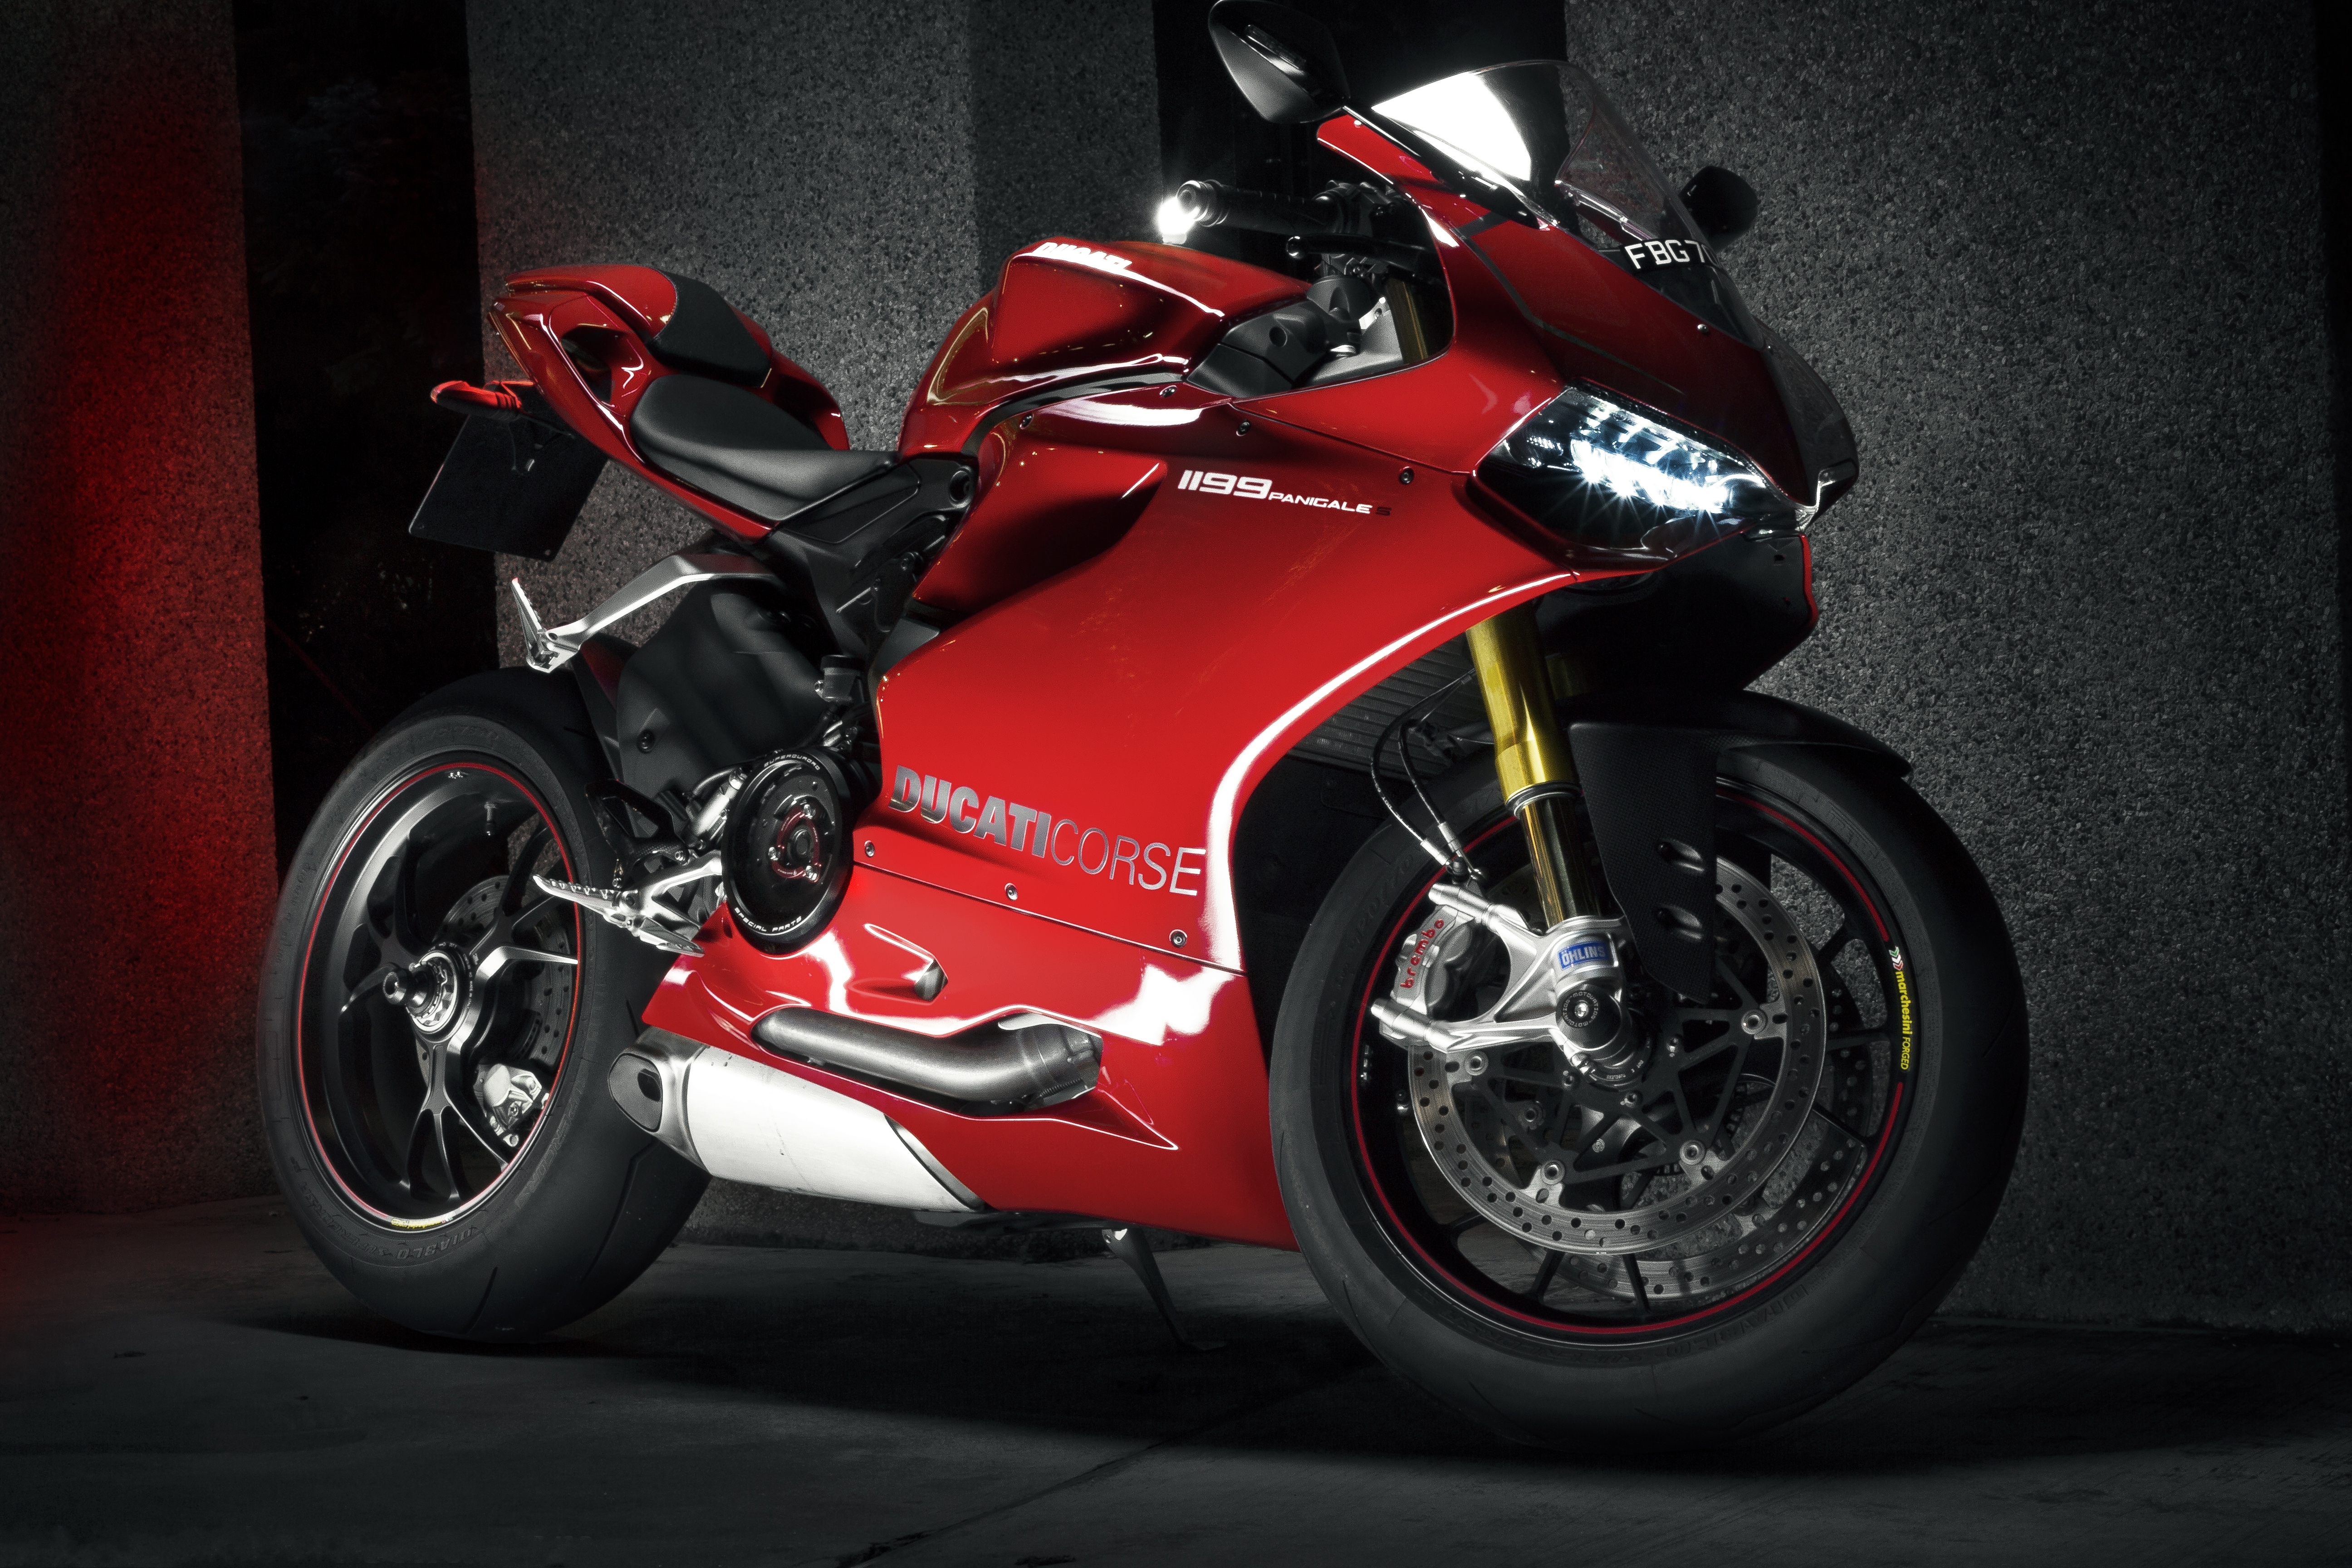 ducati, motorcycle, motorcycles, red, 1199, ducati 1199 panigale